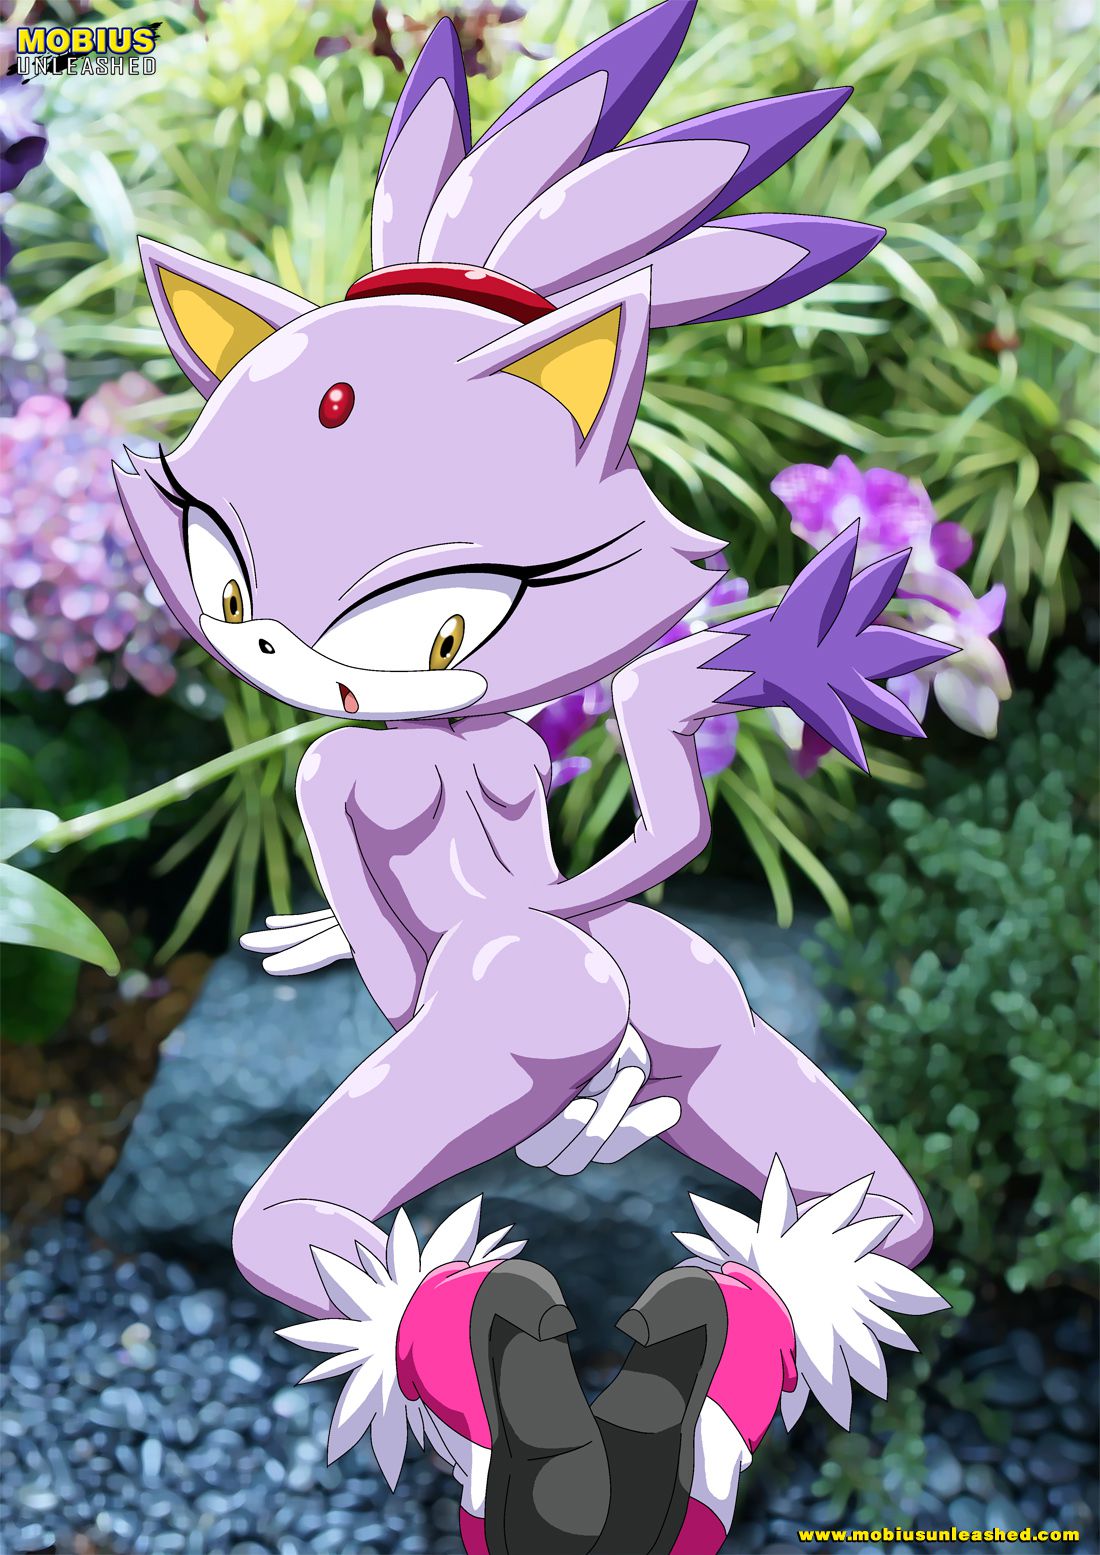 Mobius Unleashed: Blaze the Cat 20